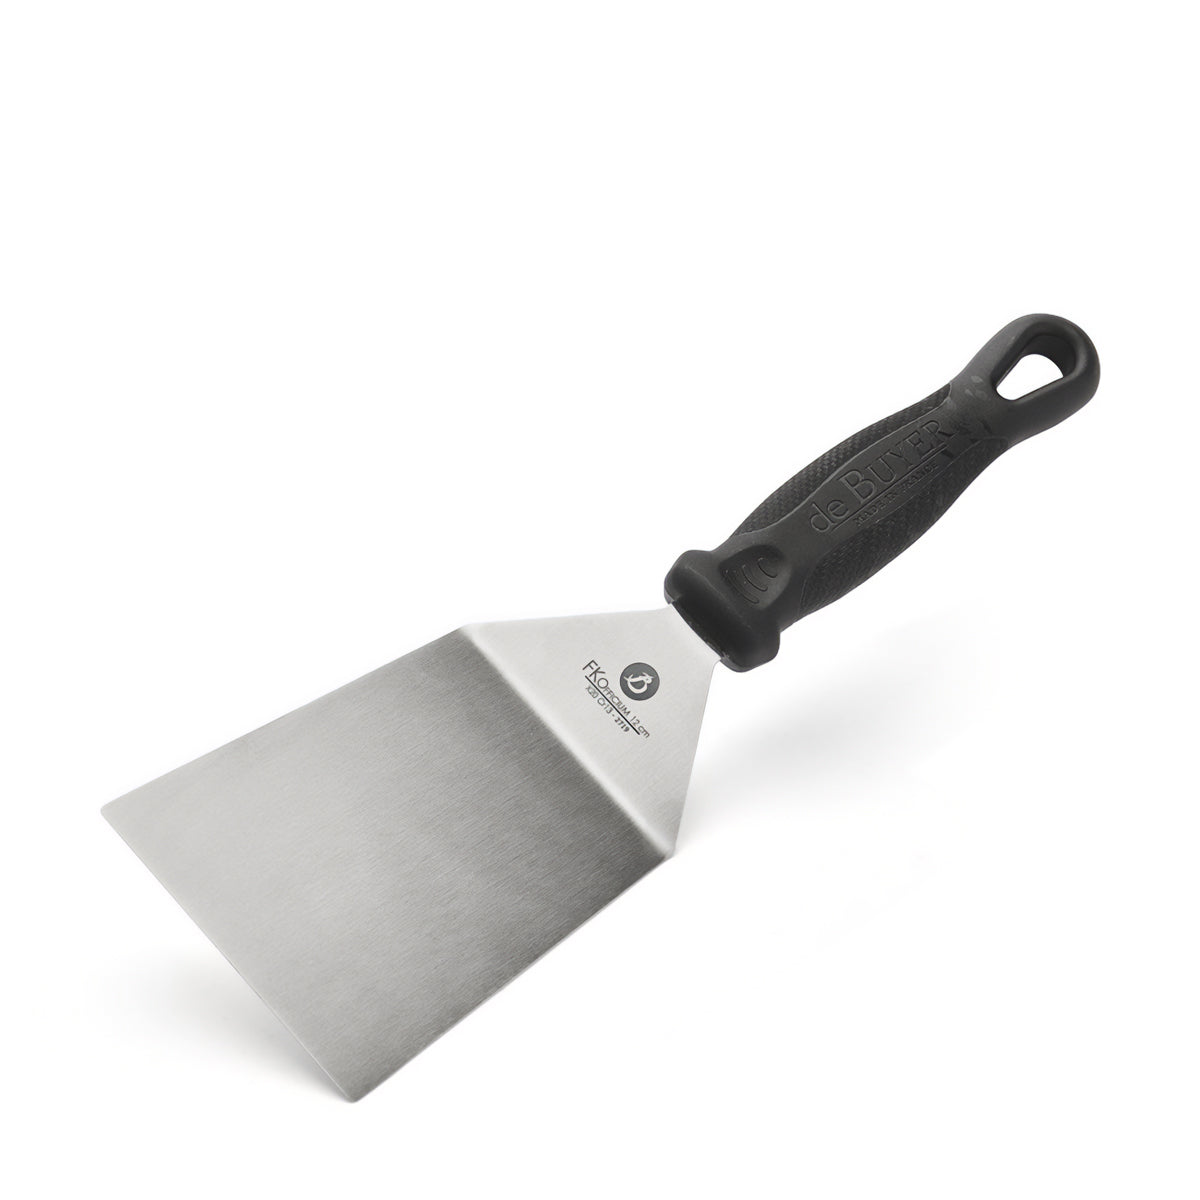 LARGE SPATULA FKOFFICIUM STAINLESS STEEL